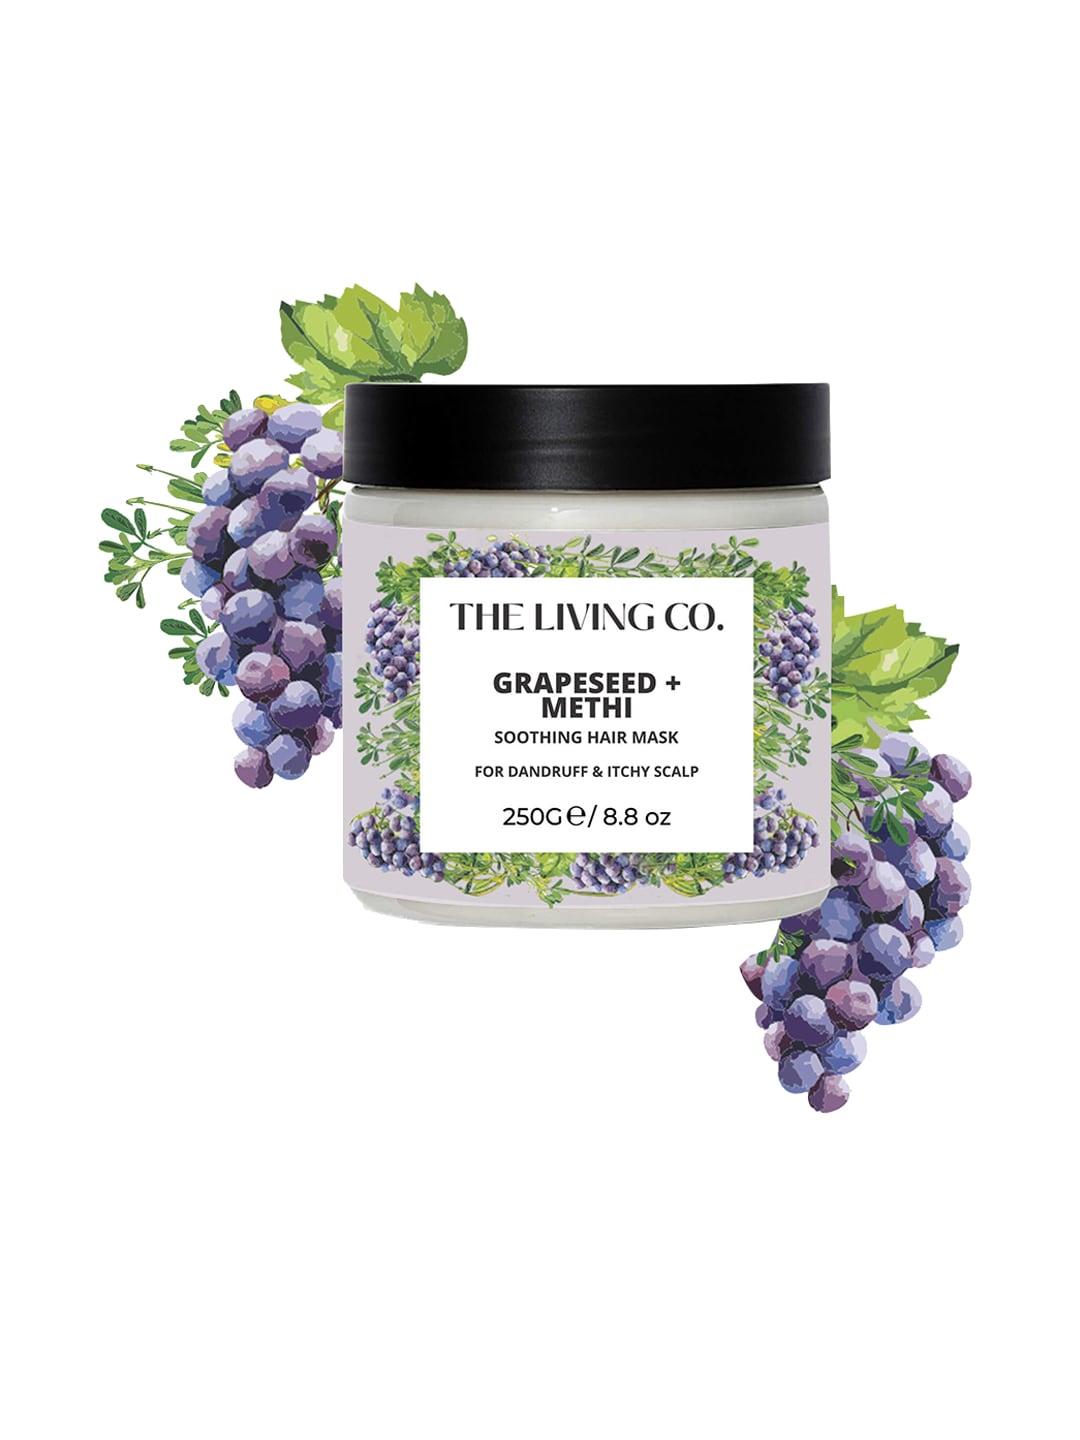 the living co. soothing hair mask - 250gm